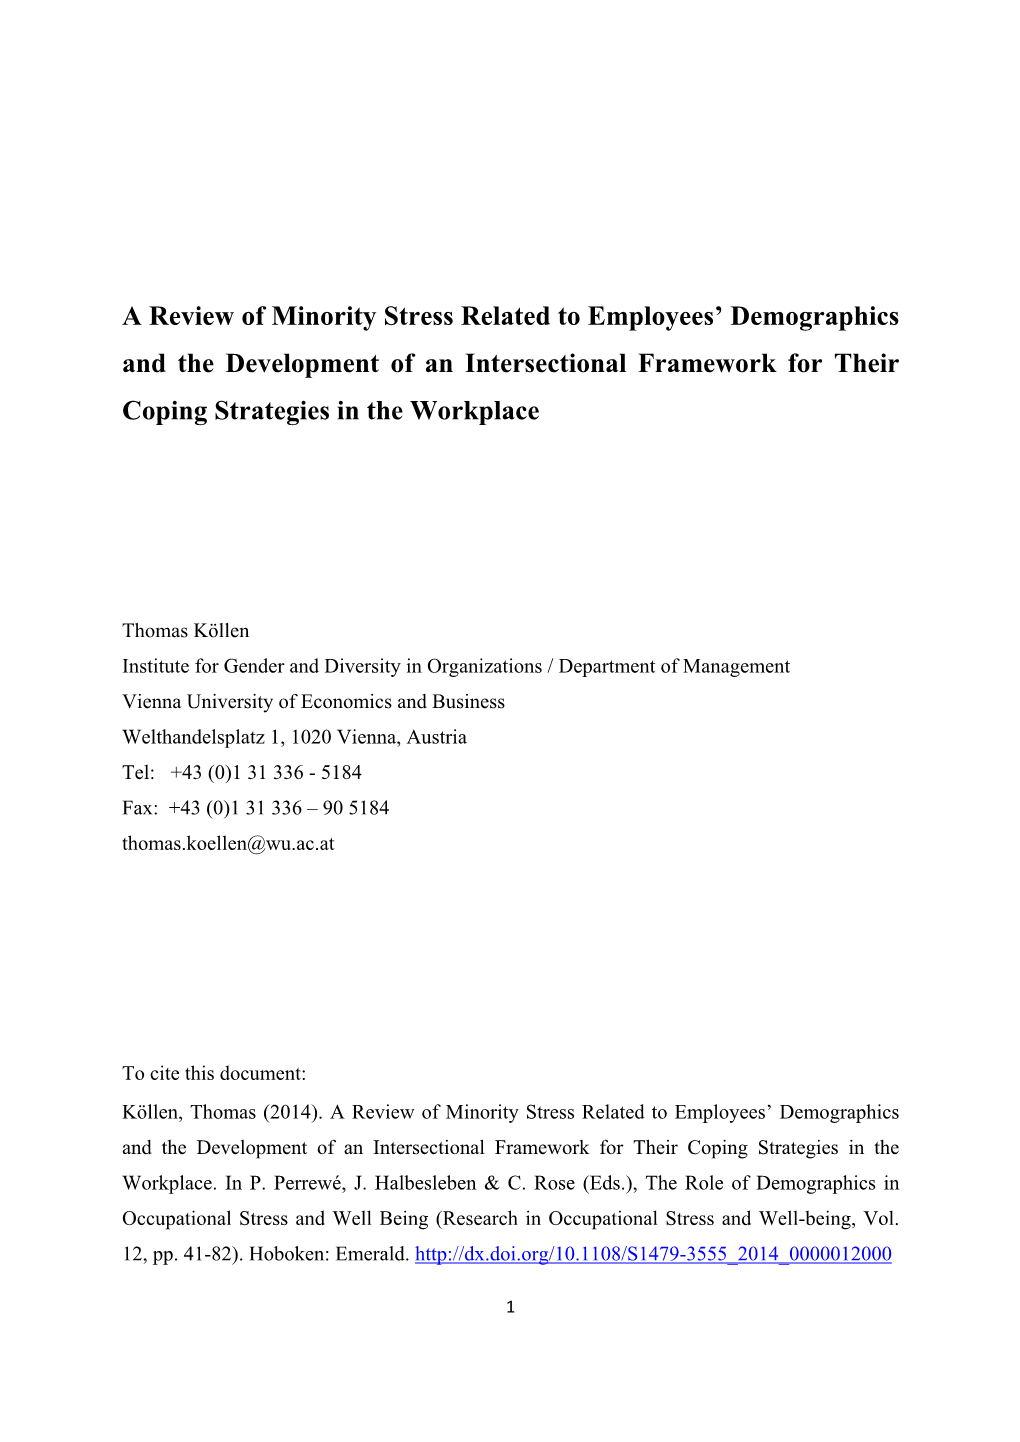 A Review of Minority Stress Related to Employees' Demographics and The